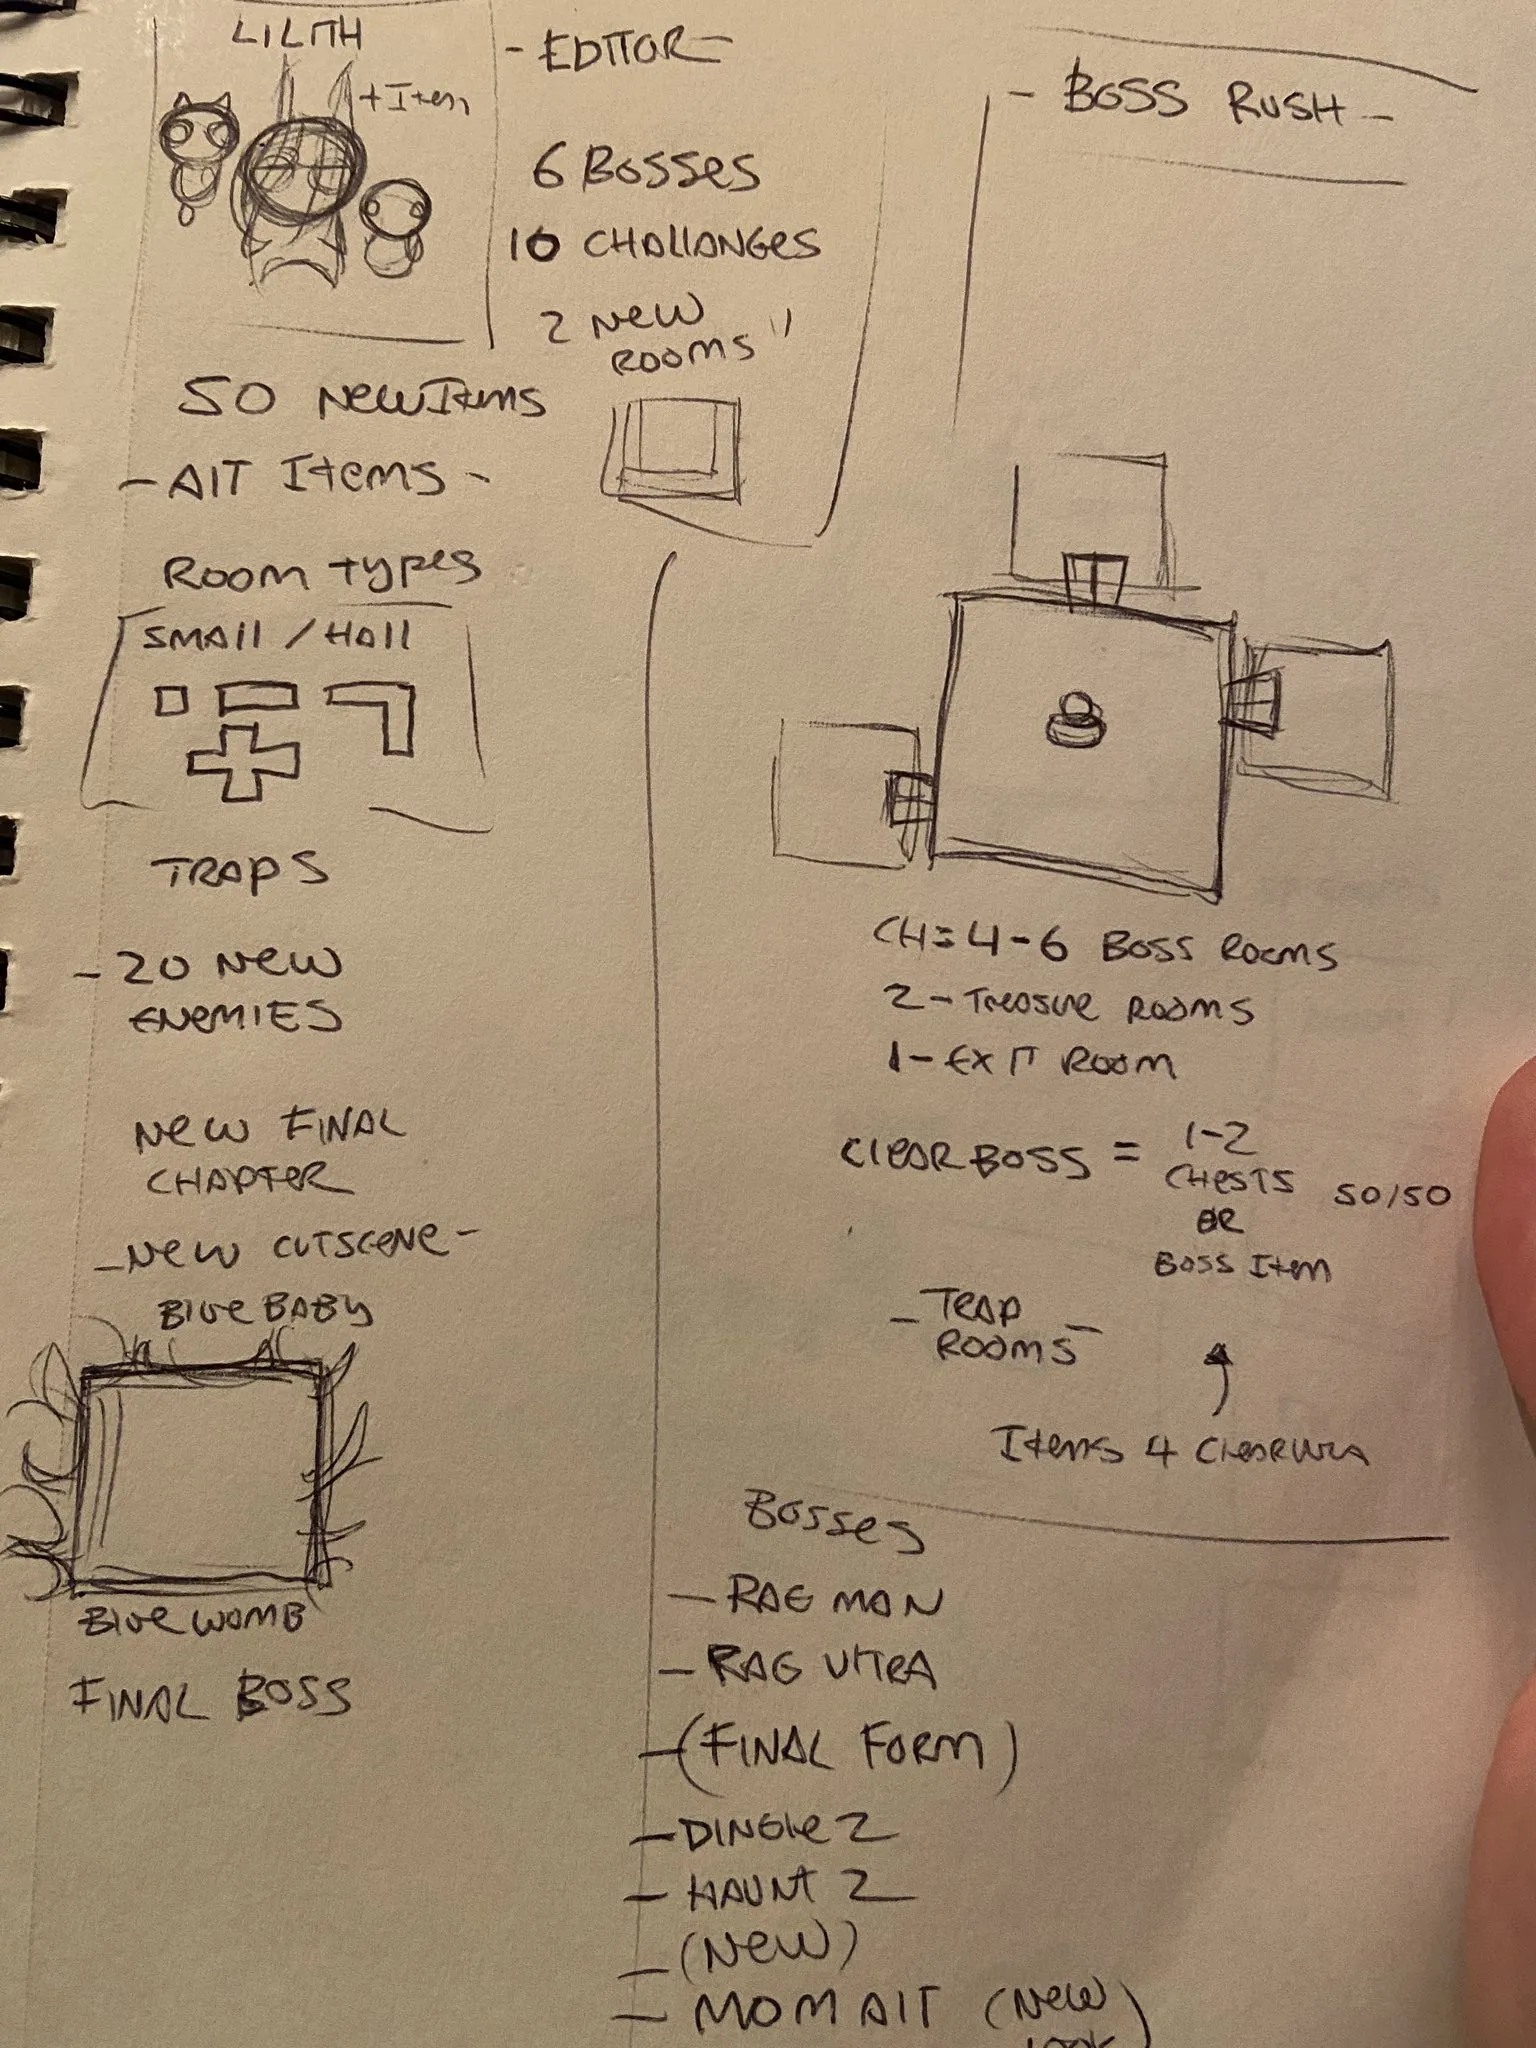 Afterbirth Room layout concepts on the upper left side by Edmund McMillen.